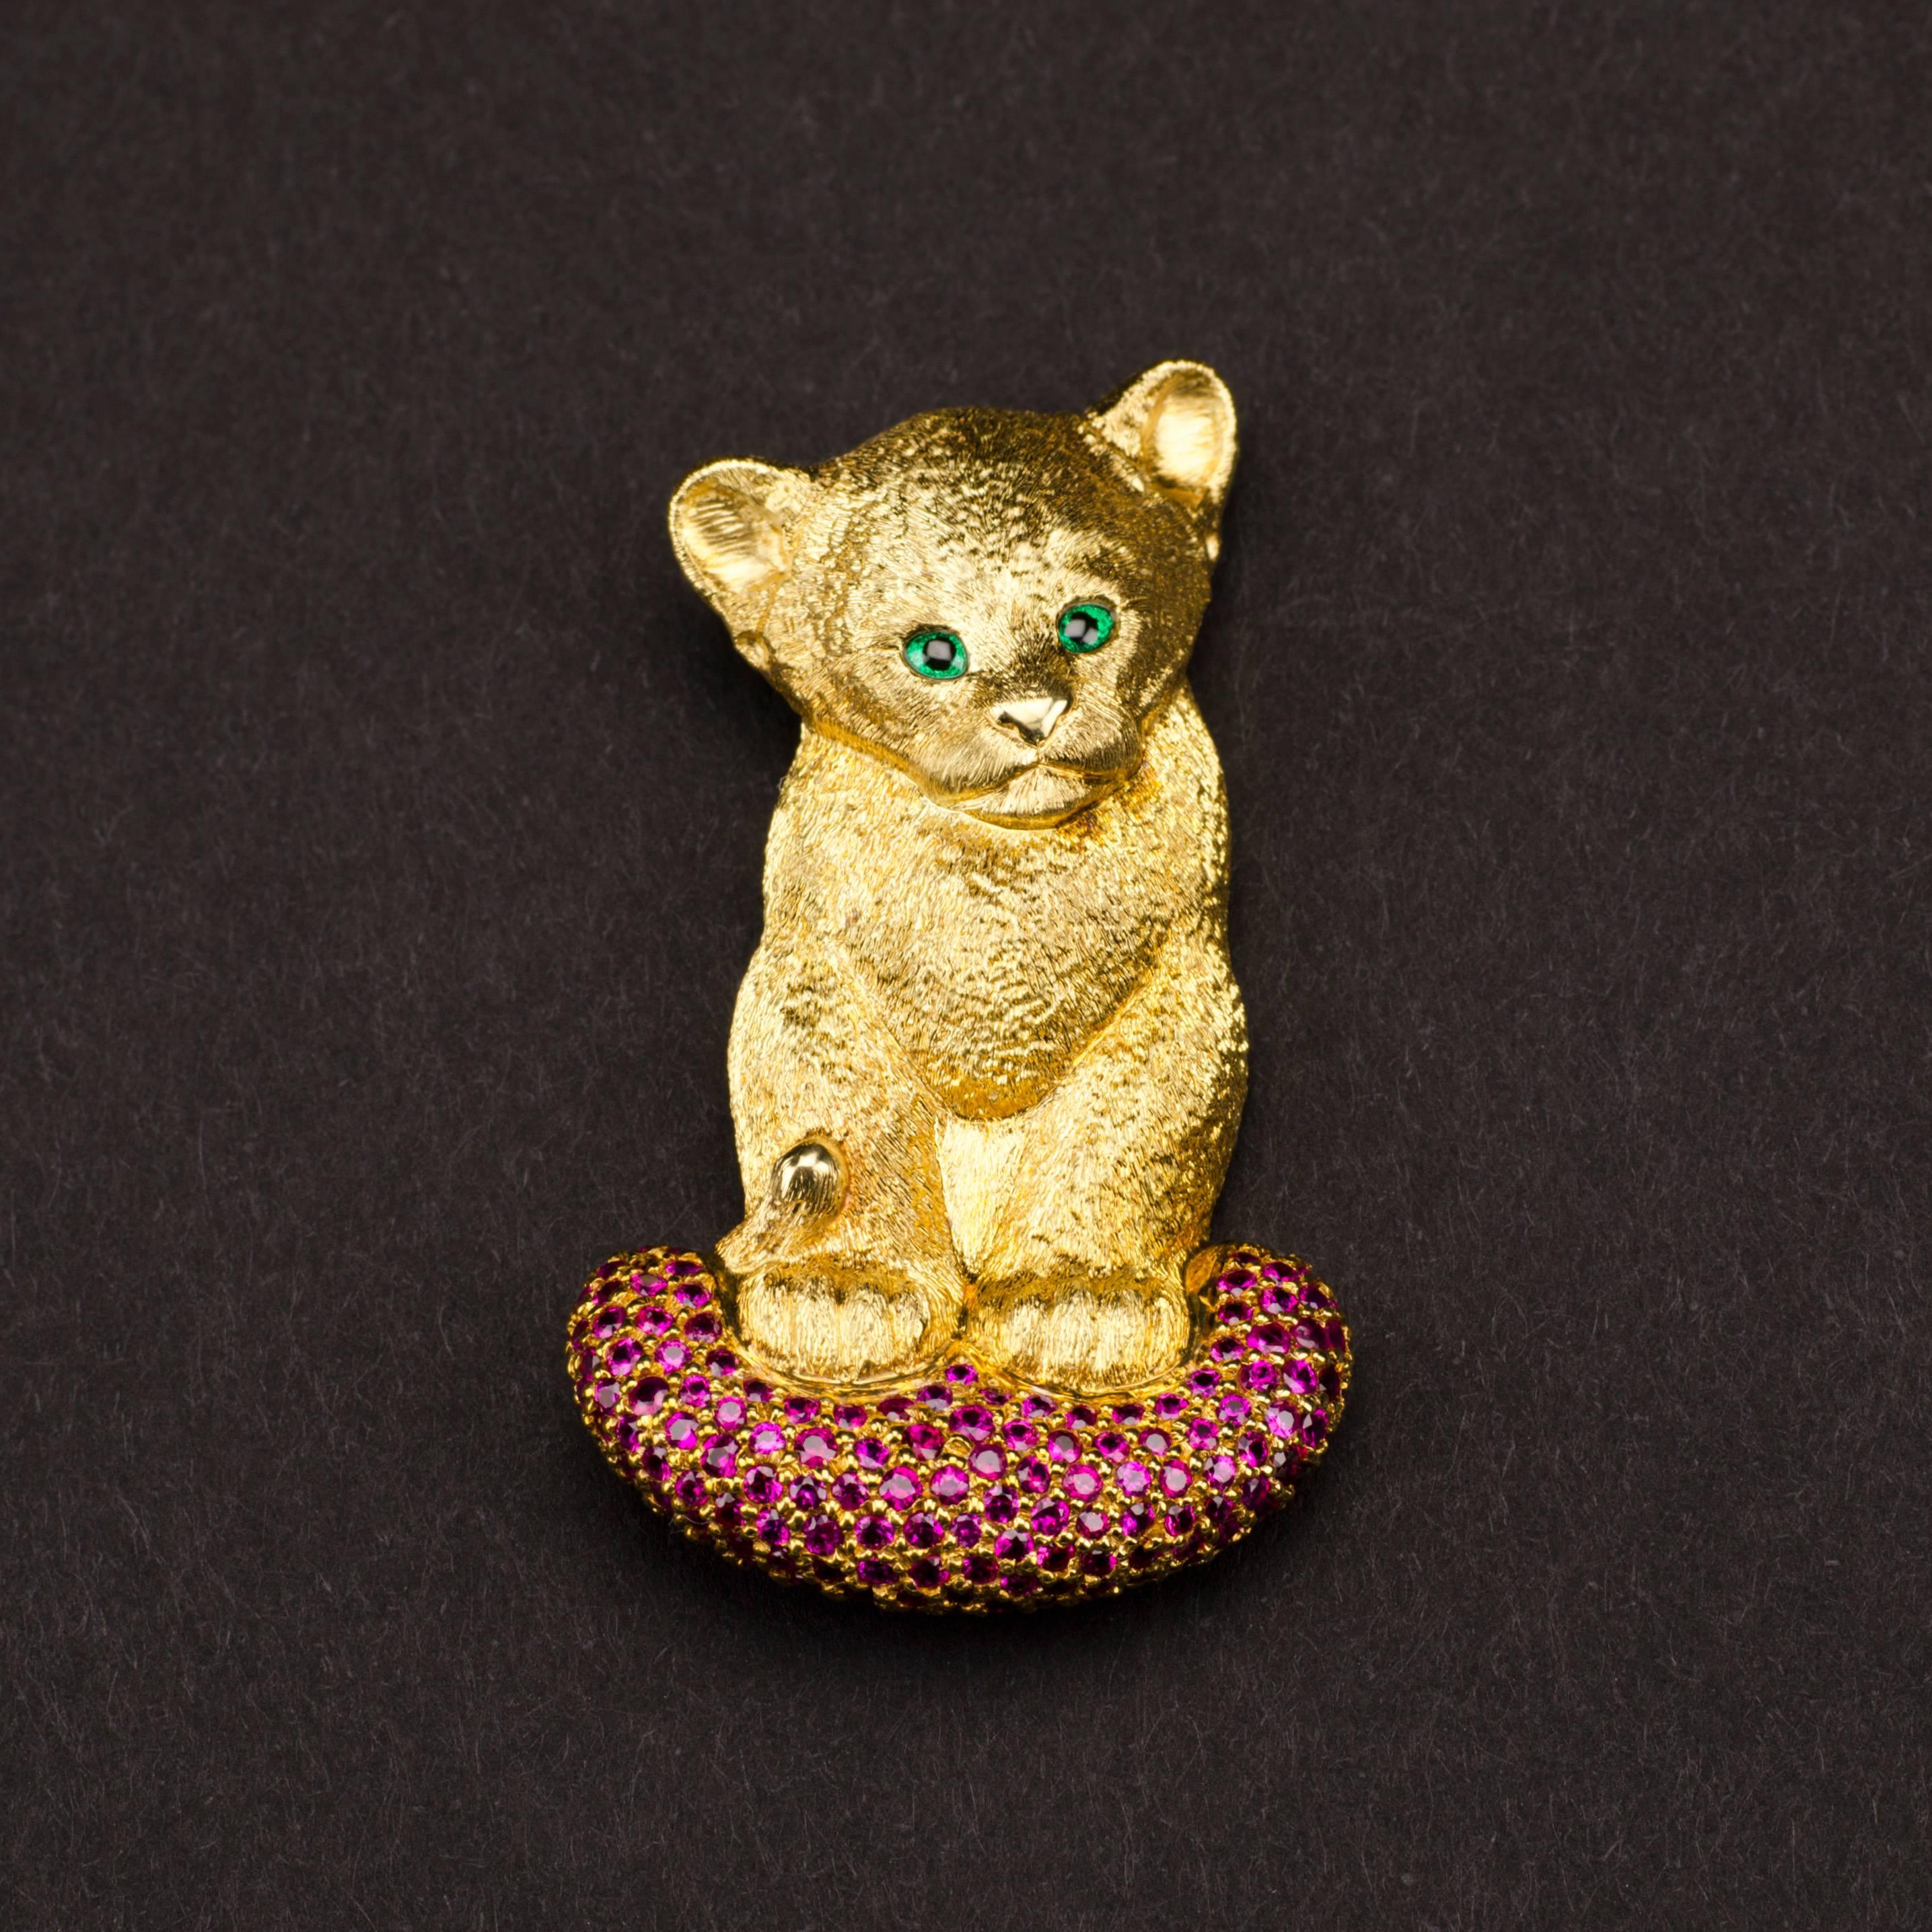 Who can resist the loving tsavorite green gaze of this endearing and extremely precious lion cub, his tail tucked around him as he sits on his ruby encrusted cushion?   

This finely sculpted 18ct lion cub brooch, which doubles as a pendant, is an